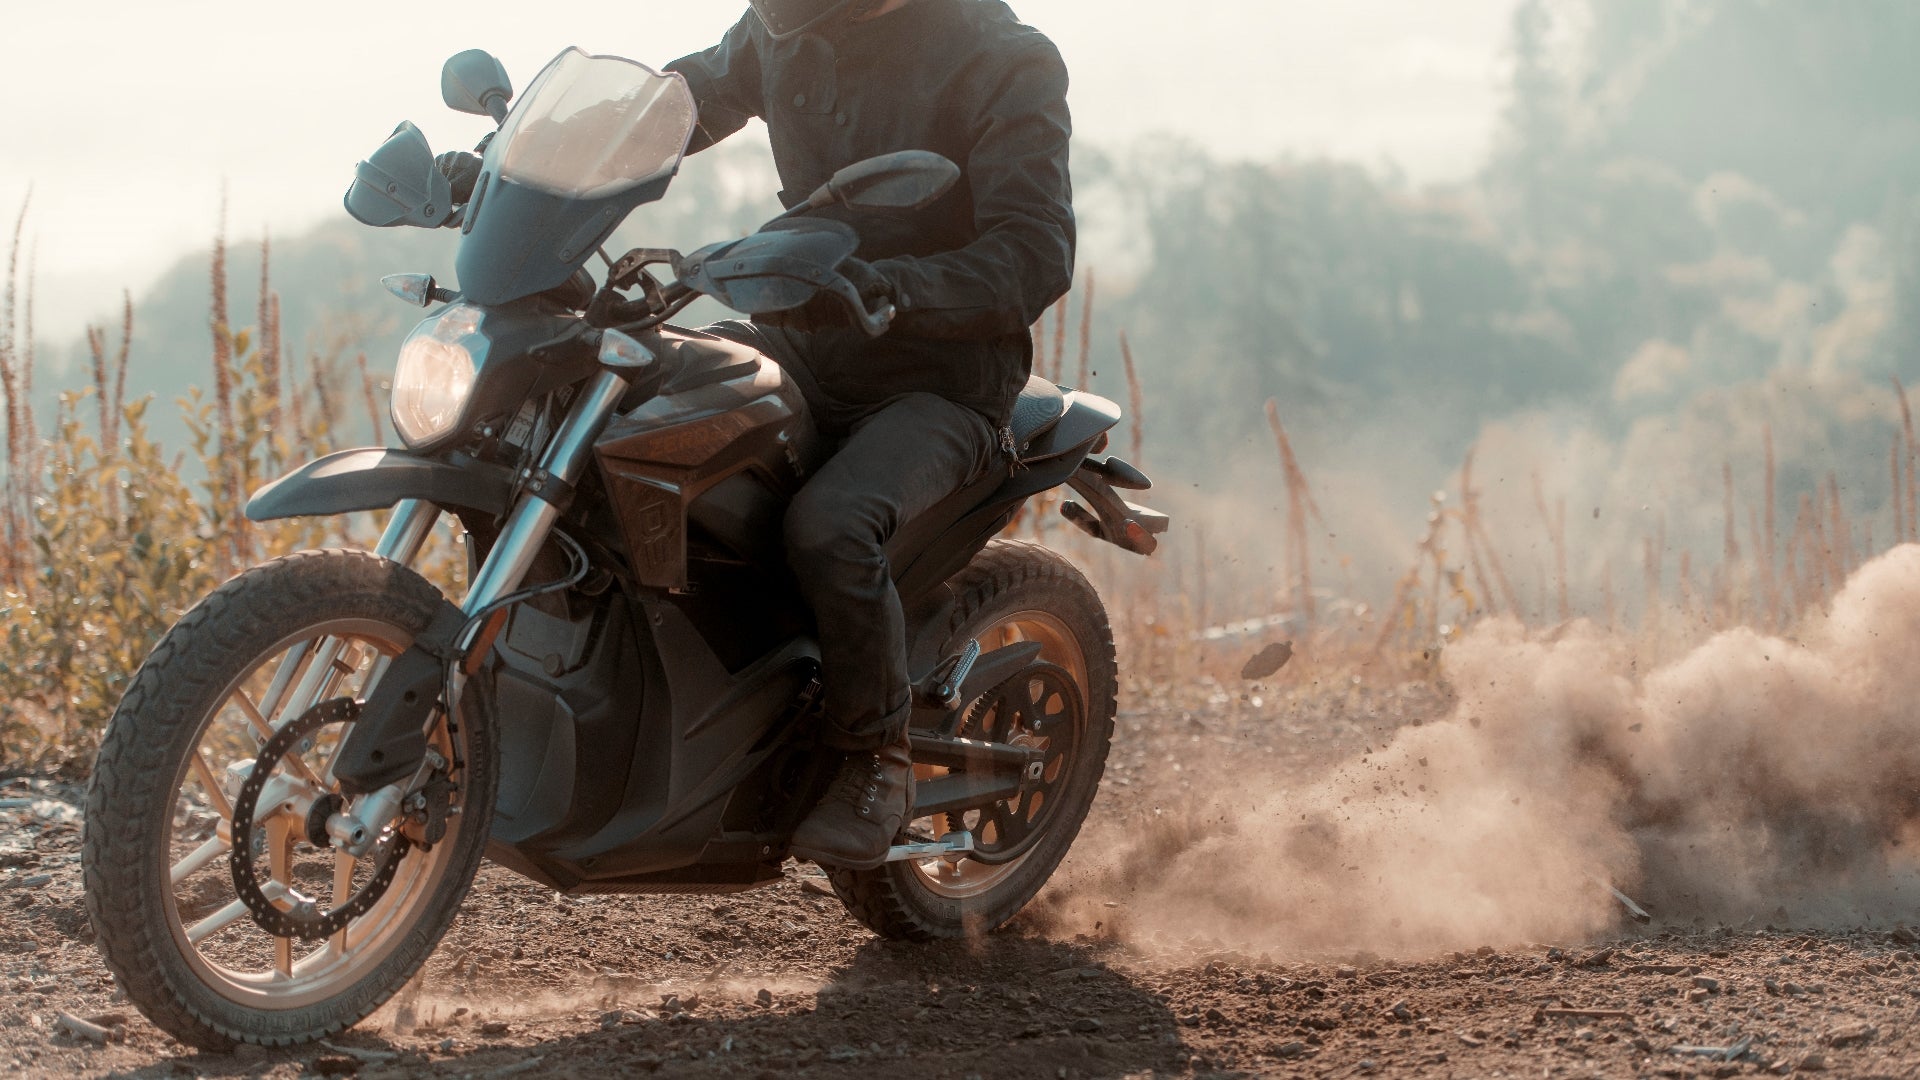 2019 Zero Motorcycles Lineup: The Clear Leader in Electric Bikes Gets Even Better